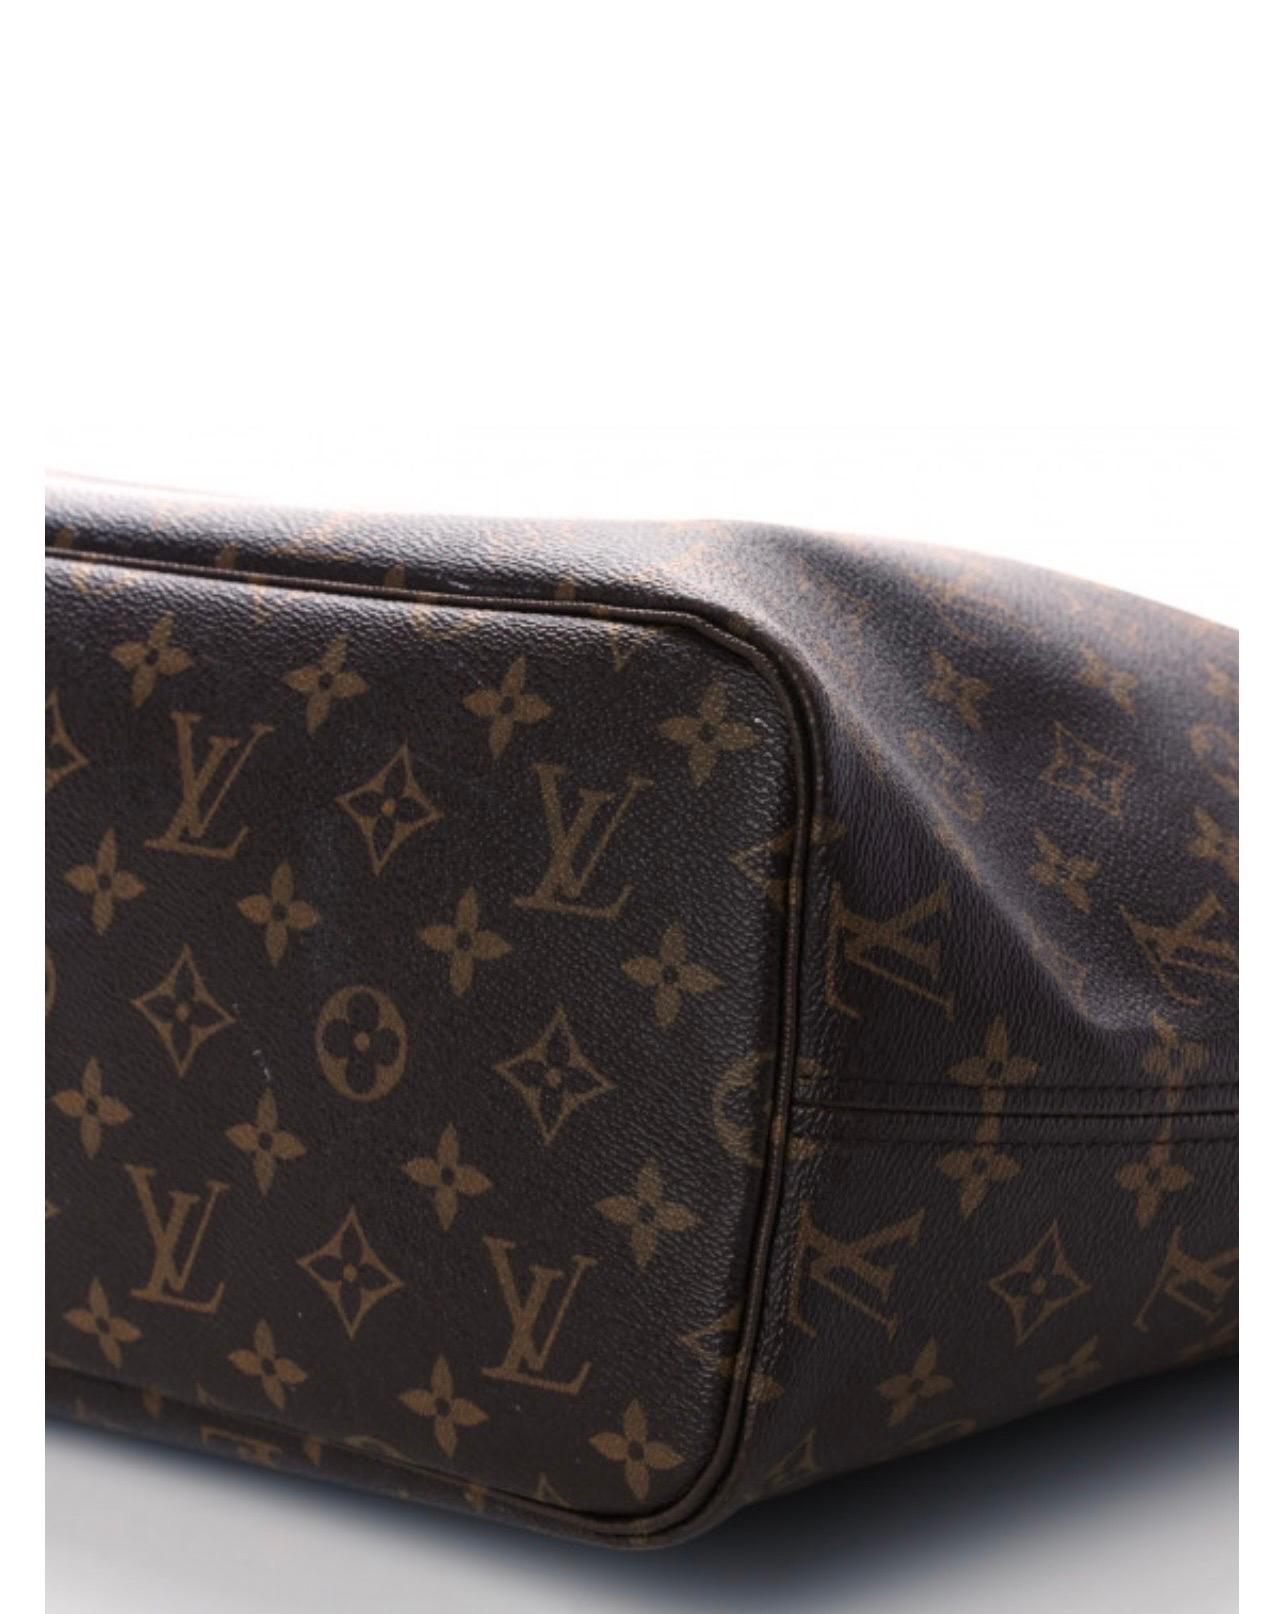 Brown and tan monogram coated canvas Louis Vuitton Neverfull MM with brass hardware, dual flat shoulder straps, tan Vachetta leather trim, drawstring accents at sides, tonal striped canvas lining, single zip pocket at interior wall and clasp closure